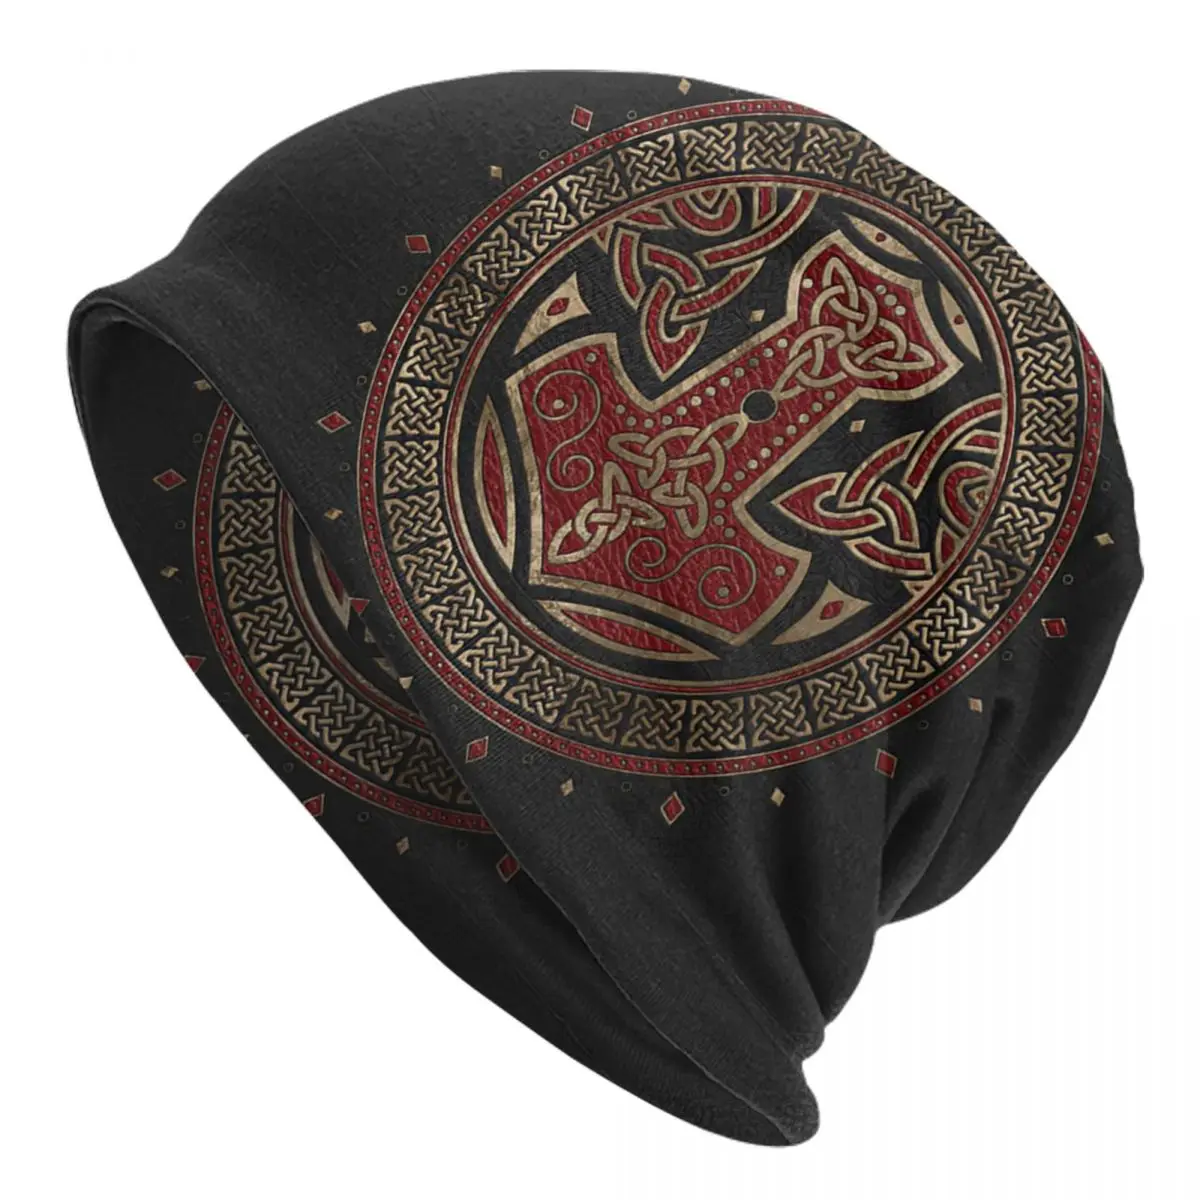 The Hammer Of Thor Black Adult Men's Women's Knit Hat Keep warm winter knitted hat